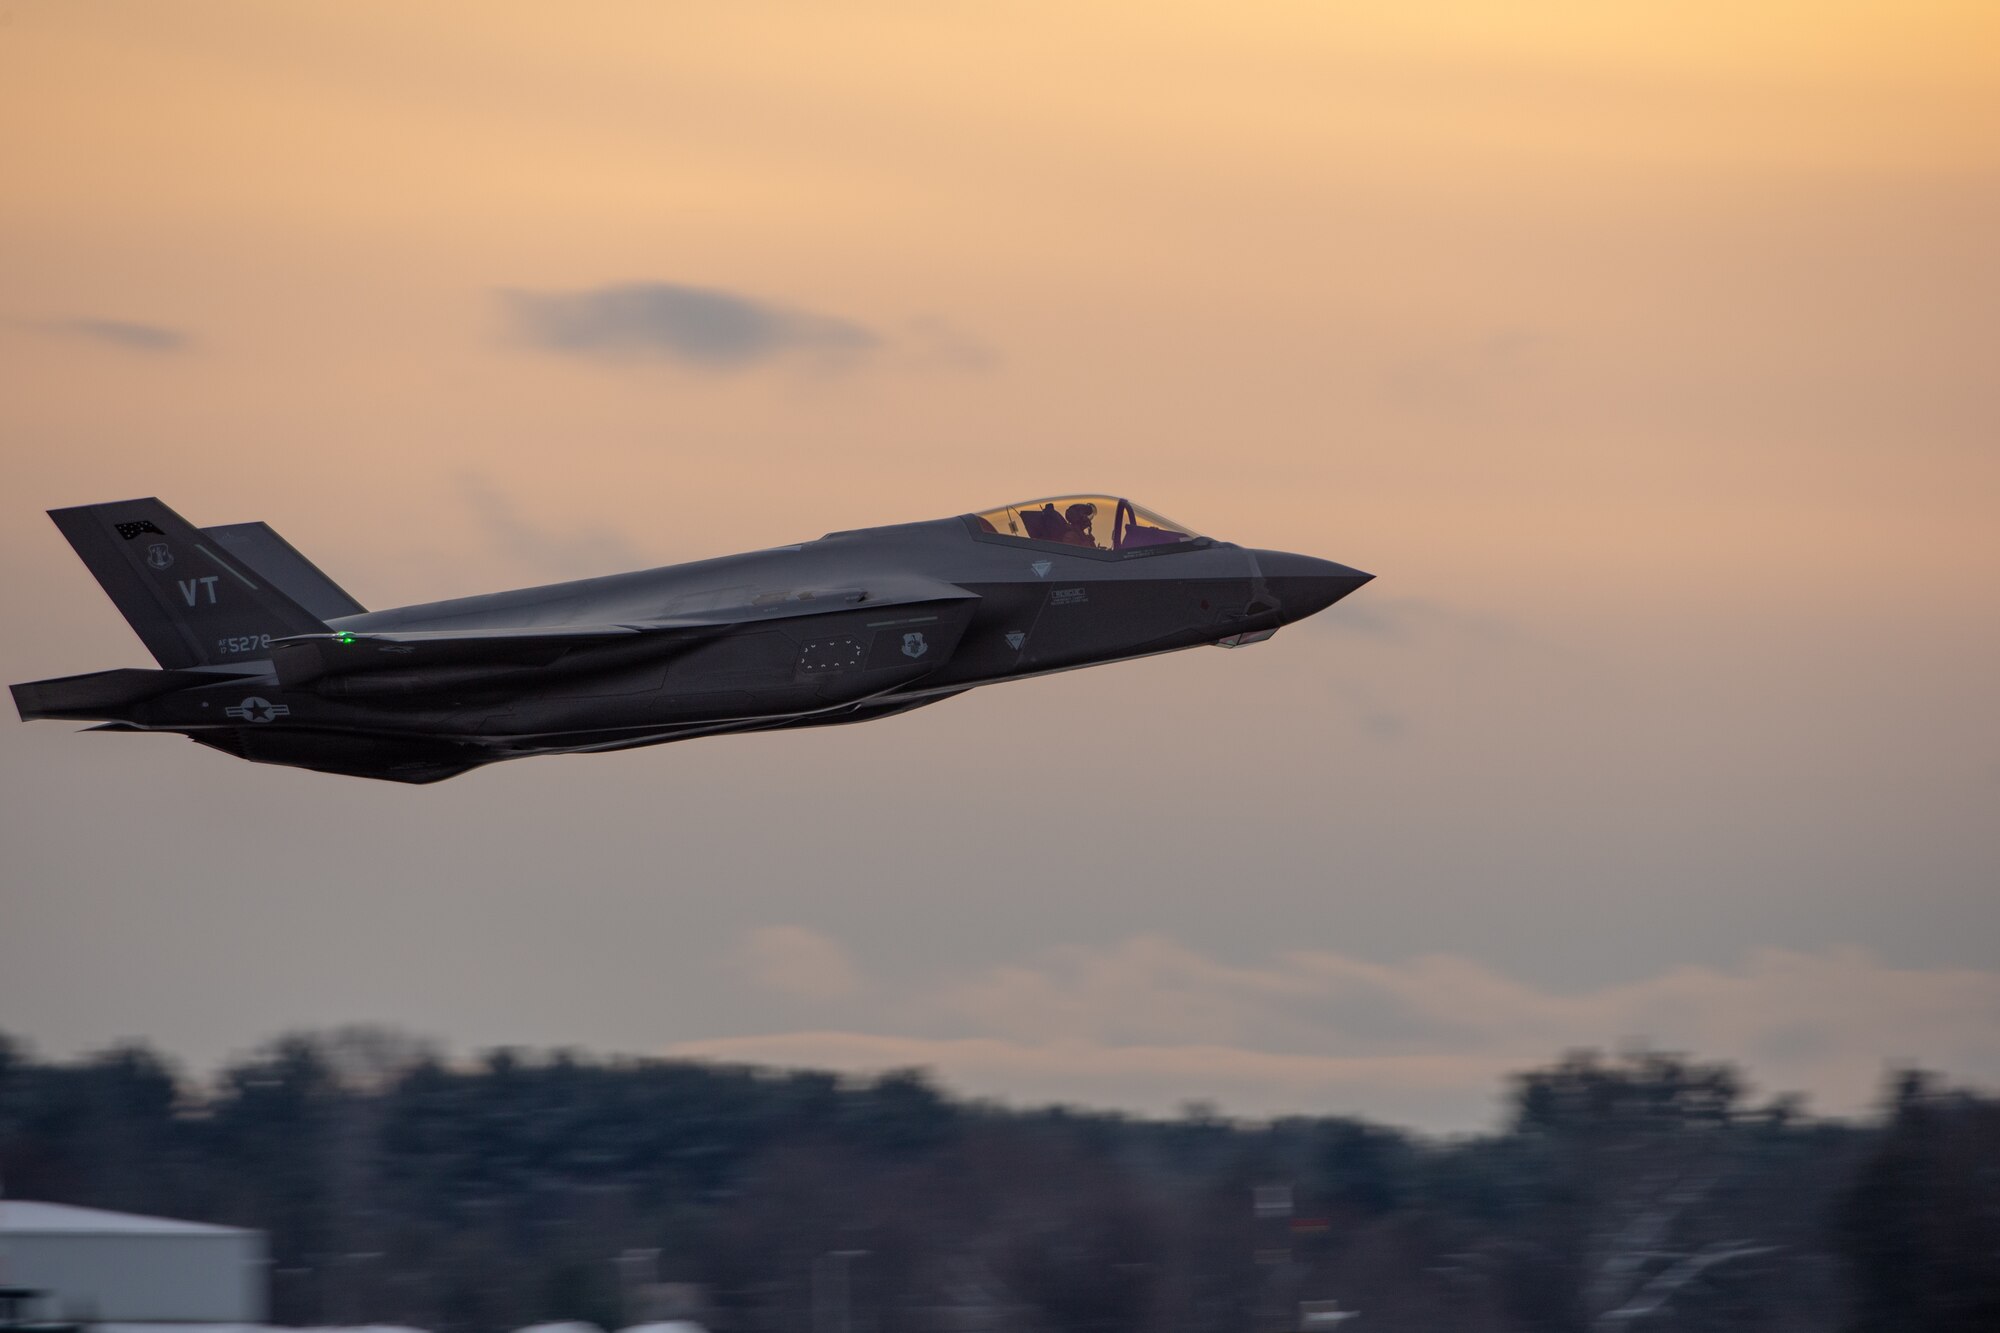 Col. Nathan "Wiz" Graber, previous commander of the 158th Operations Group, 158th Fighter Wing, flies by in an F-35A Lightning II during his final flight as a fighter pilot in the U.S. Air Force.